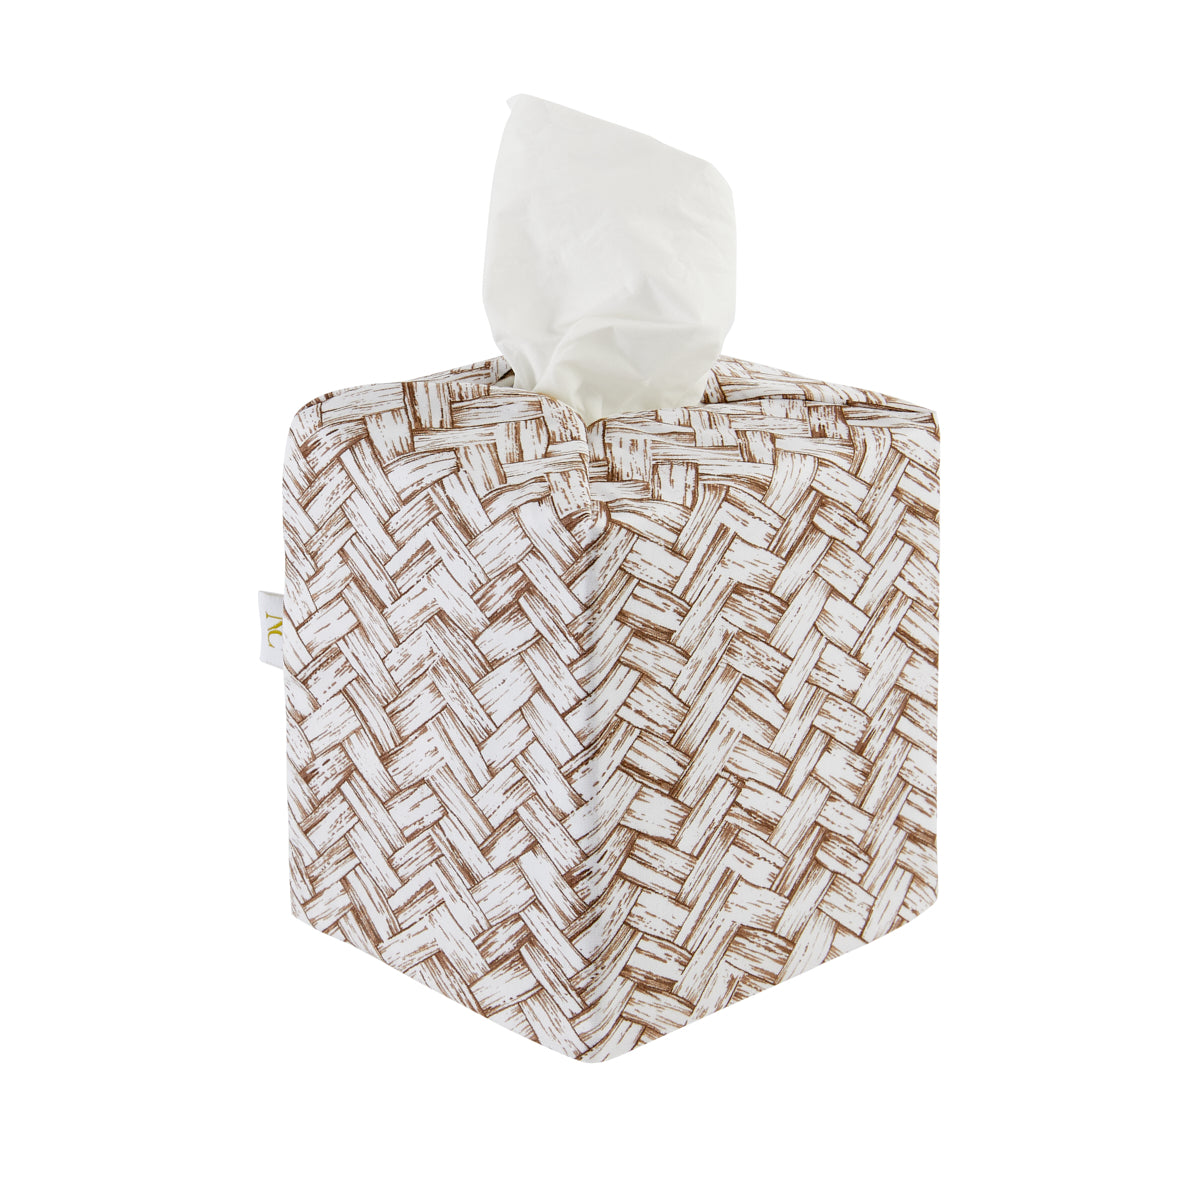 Tissue Box Cover - Basketweave Brown